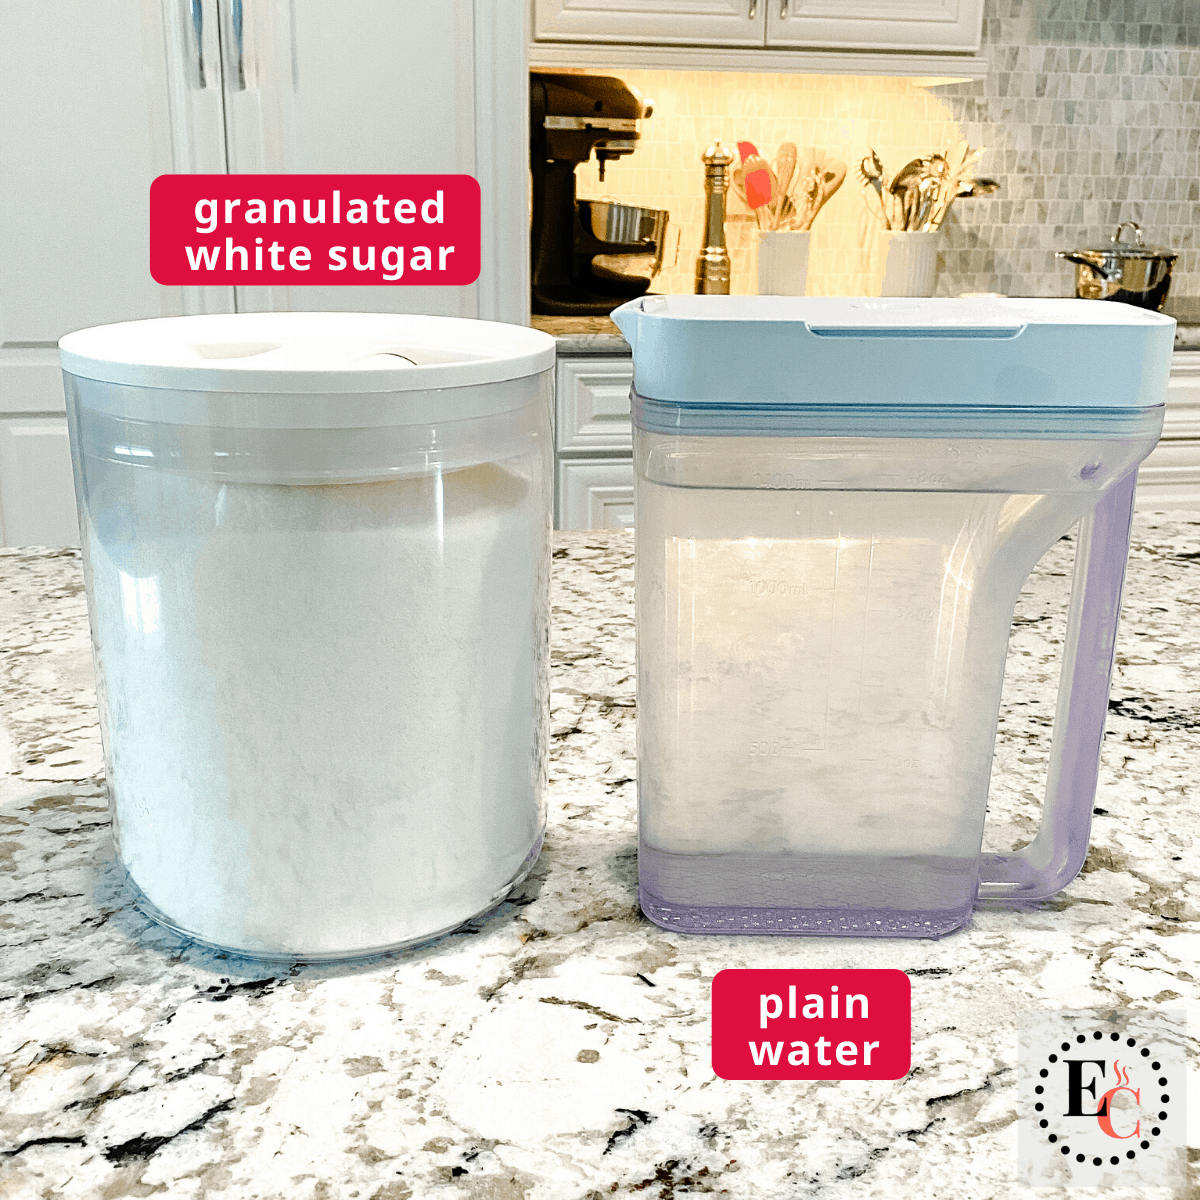 The ingredients: granulated white sugar in a clear canister and plain water in a clear pitcher.